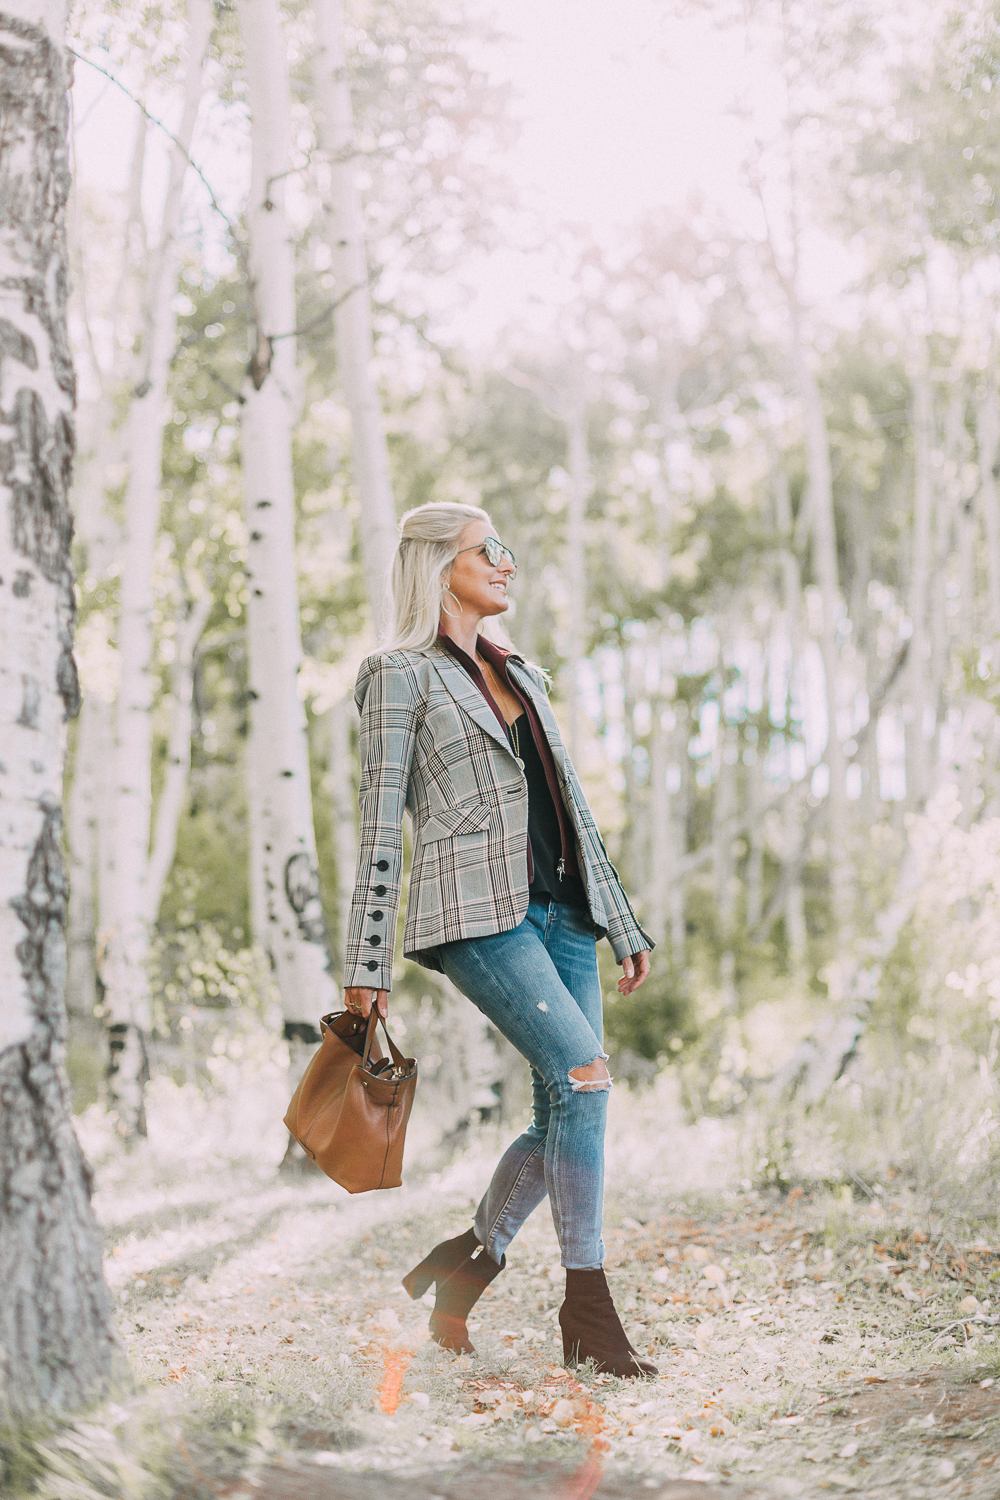 Fall Booties 2018 featuring Vince Camuto black suede side zip booties with a veronica beard plaid blazer and blankNYC jeans on fashion blogger over 40, Erin Busbee of BusbeeStyle.com